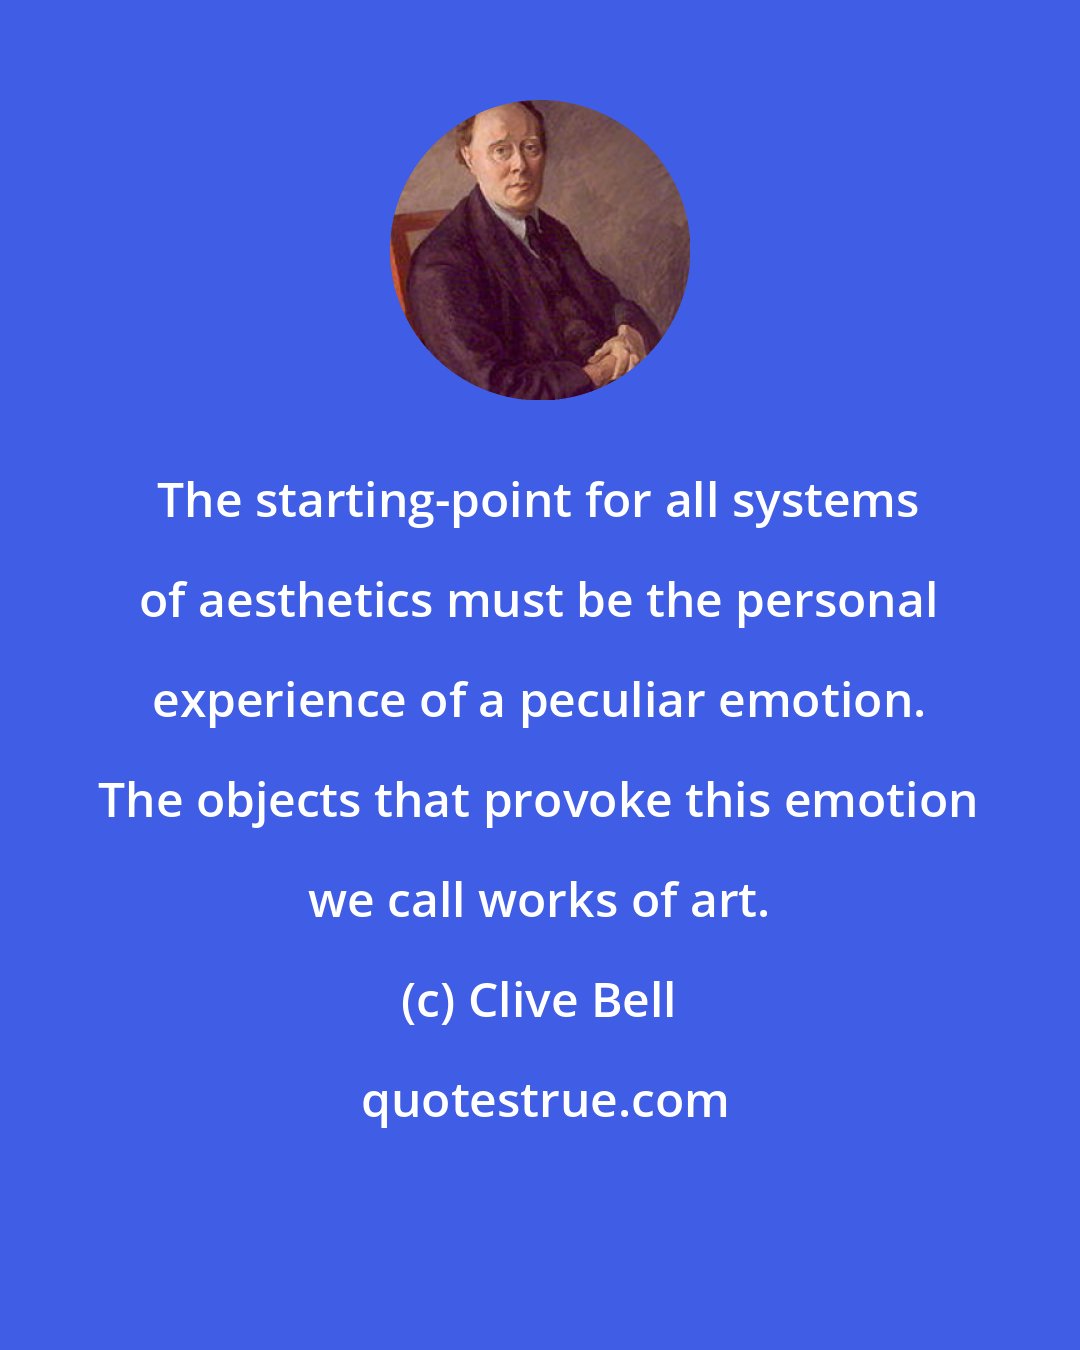 Clive Bell: The starting-point for all systems of aesthetics must be the personal experience of a peculiar emotion. The objects that provoke this emotion we call works of art.